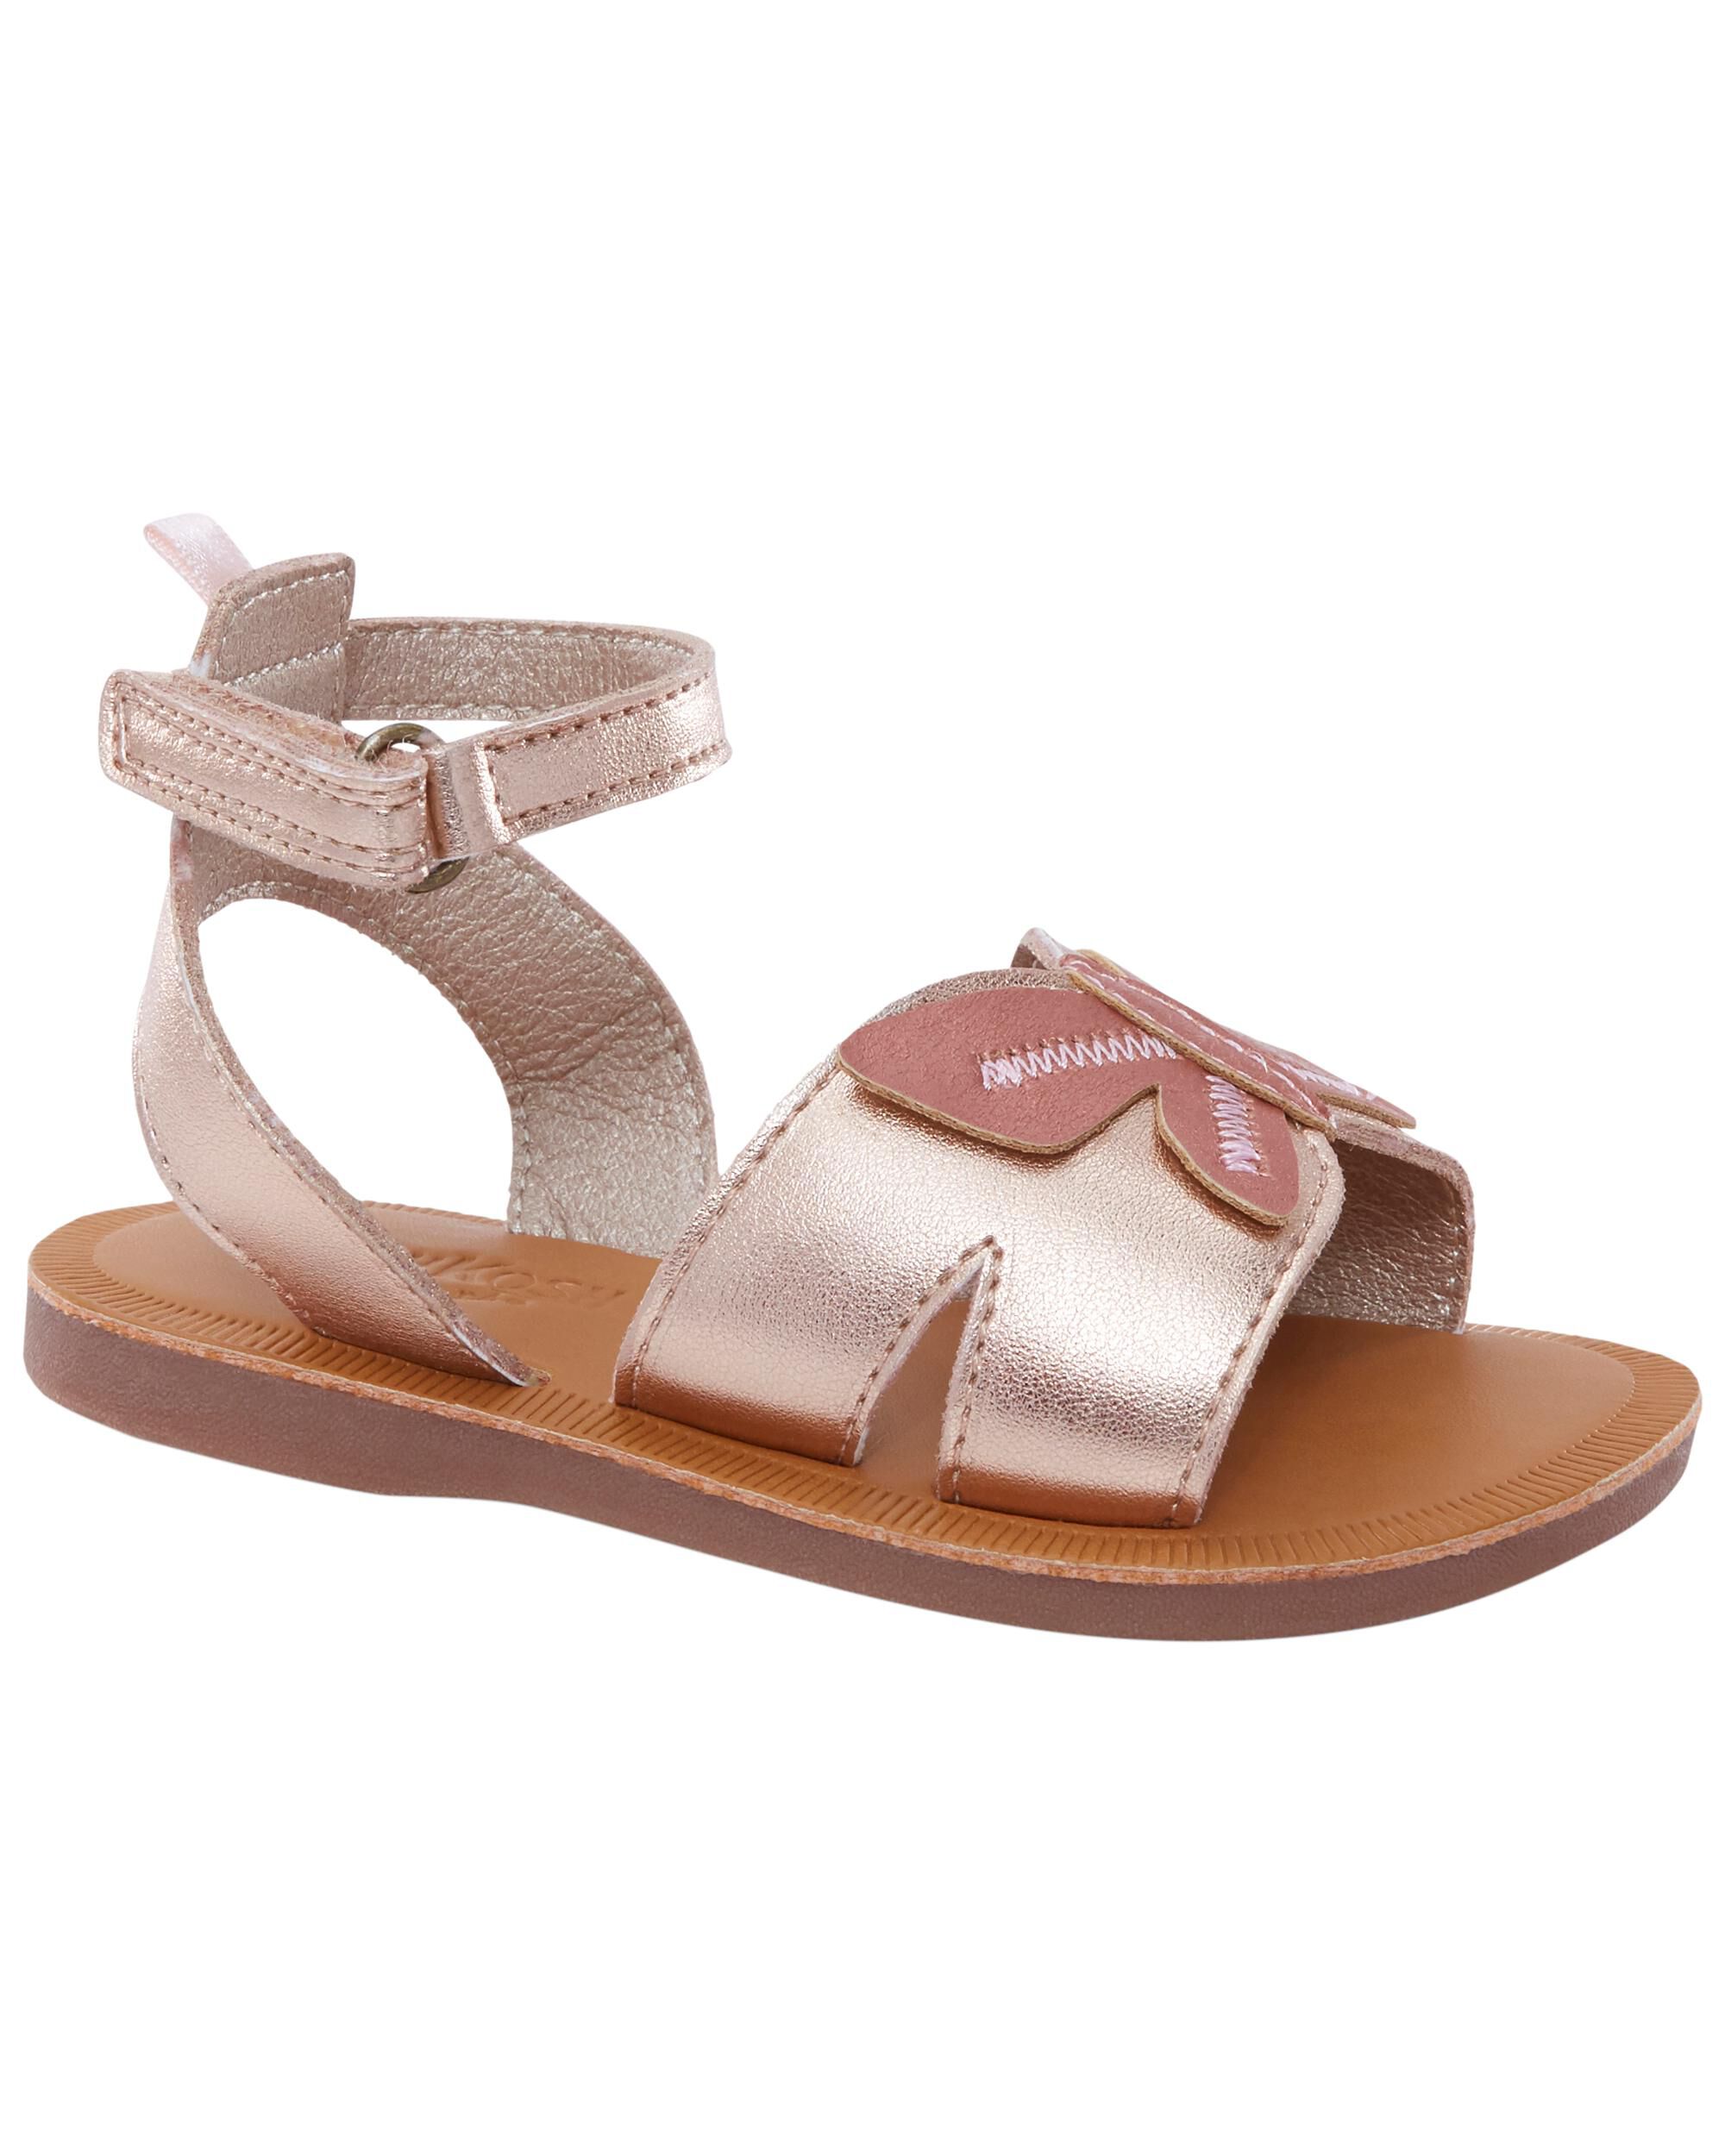 Carters Toddler Butterfly Sandal